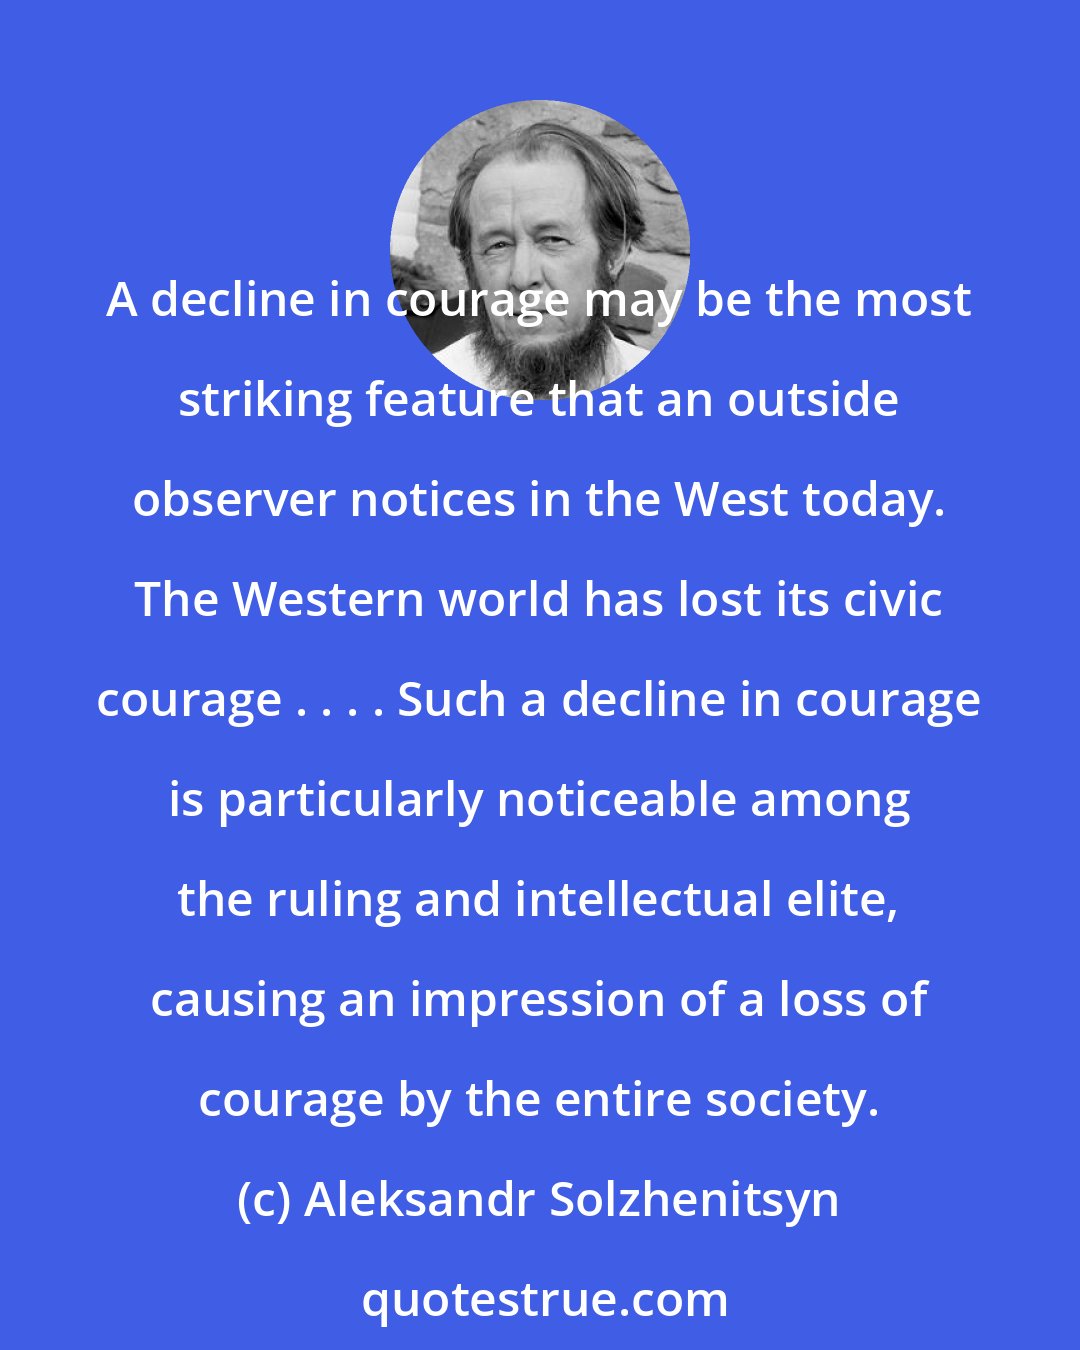 Aleksandr Solzhenitsyn: A decline in courage may be the most striking feature that an outside observer notices in the West today. The Western world has lost its civic courage . . . . Such a decline in courage is particularly noticeable among the ruling and intellectual elite, causing an impression of a loss of courage by the entire society.